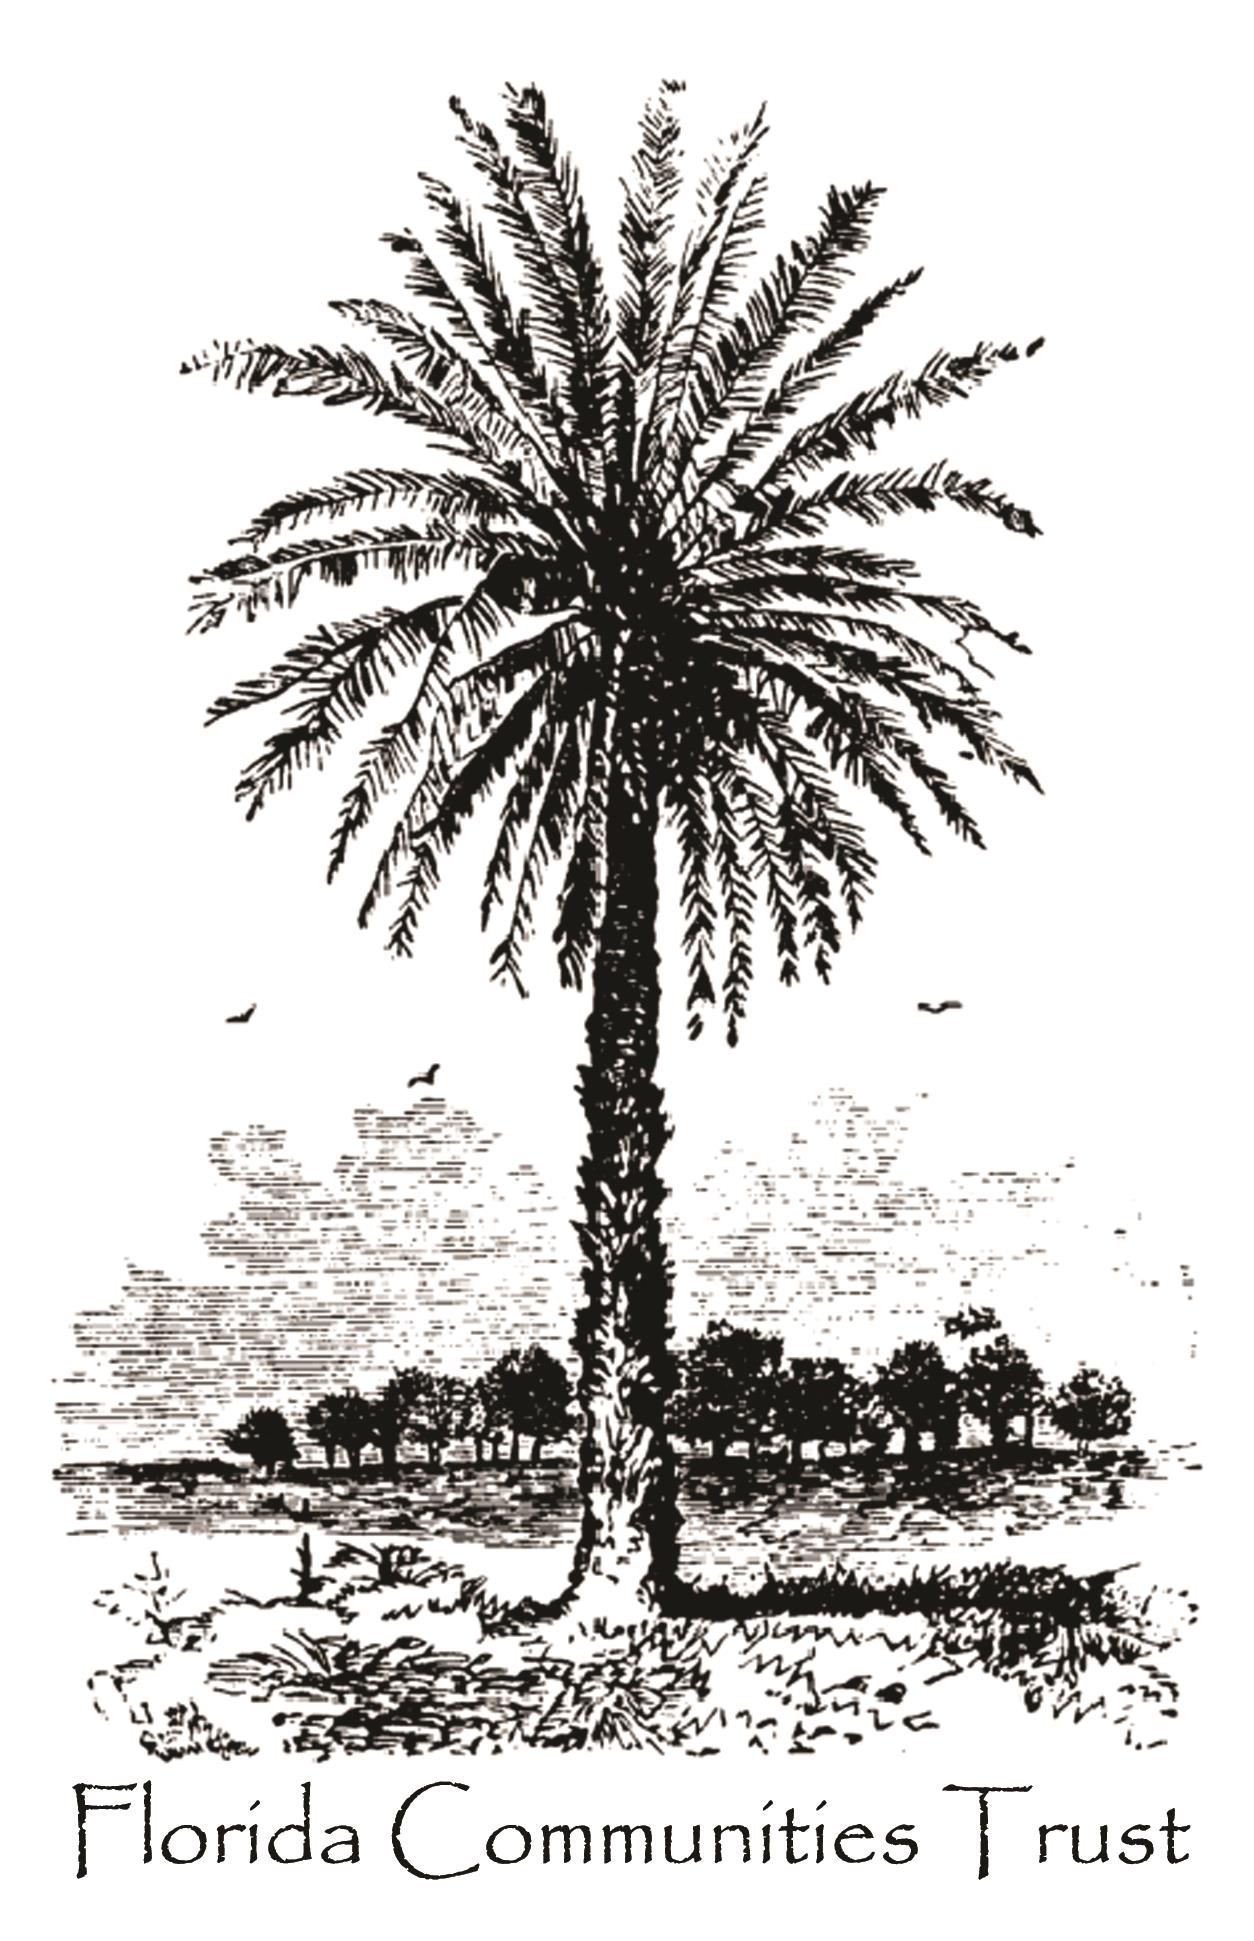 Florida Communities Trust logo with palm tree in foreground and group of trees in background